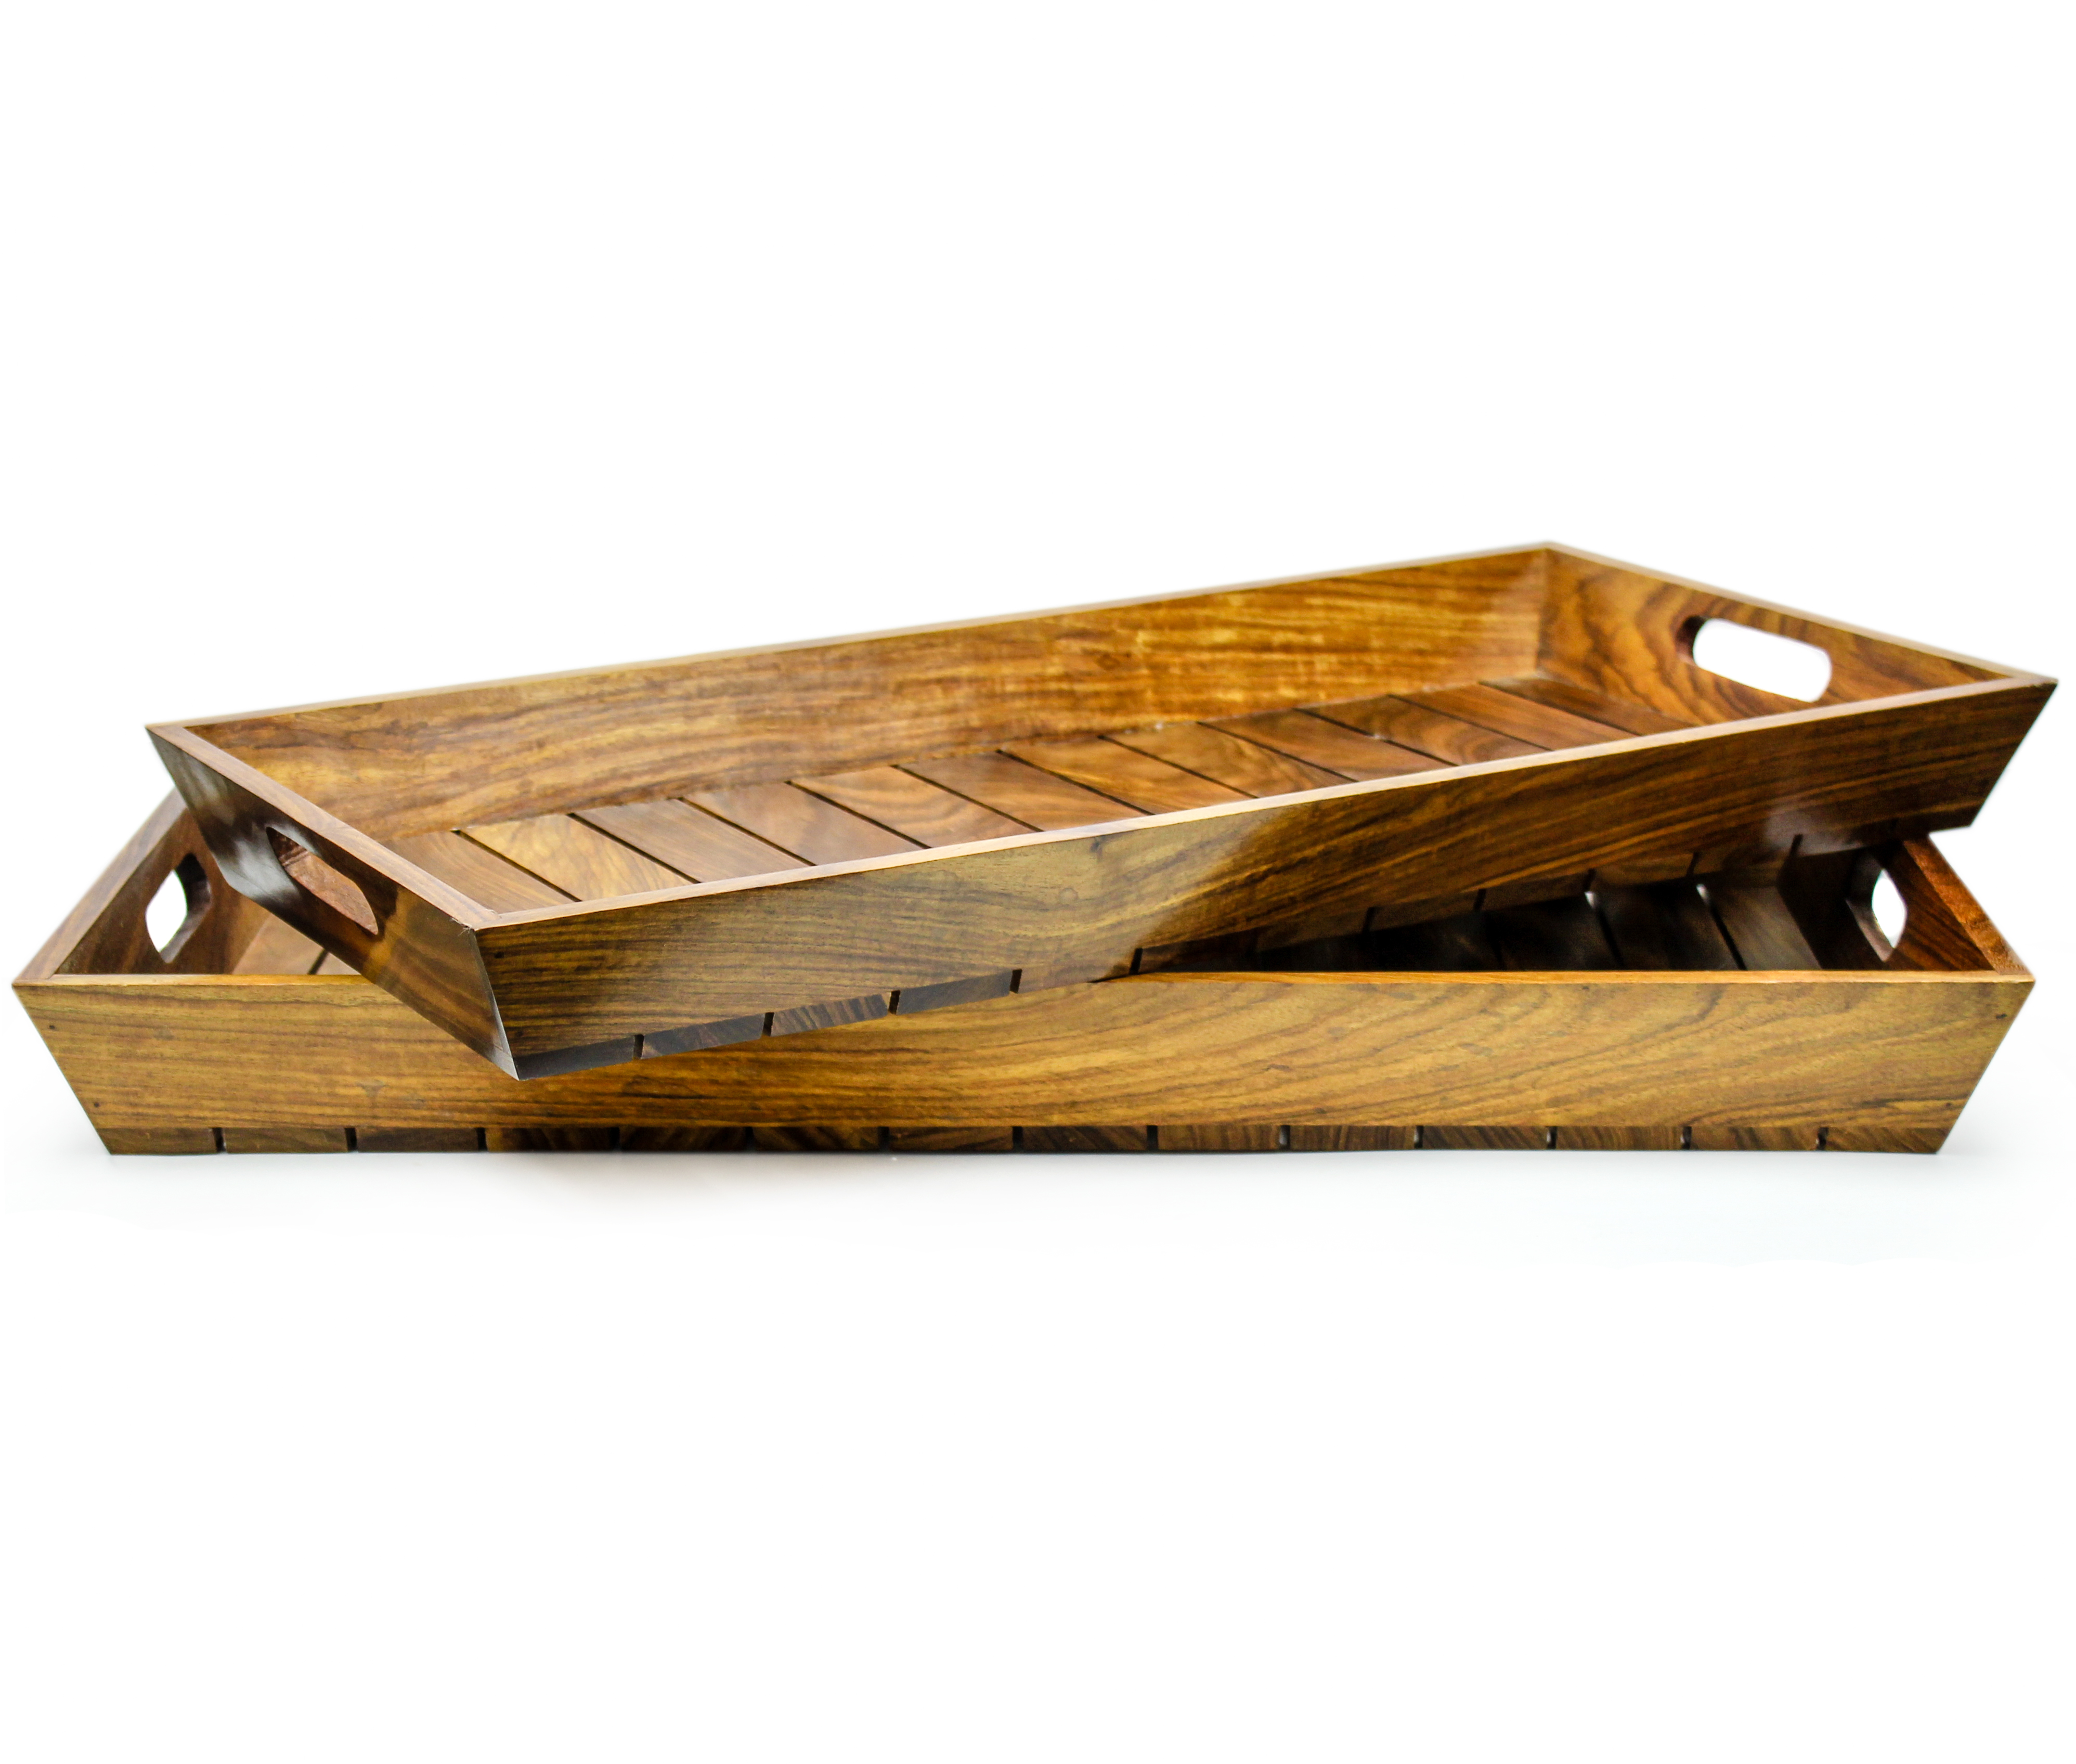  Walnut Hollow 24648 Unfinished Wood Serving Tray for Weddings,  Home Decor and Craft Projects, 10 x 12 : Home & Kitchen